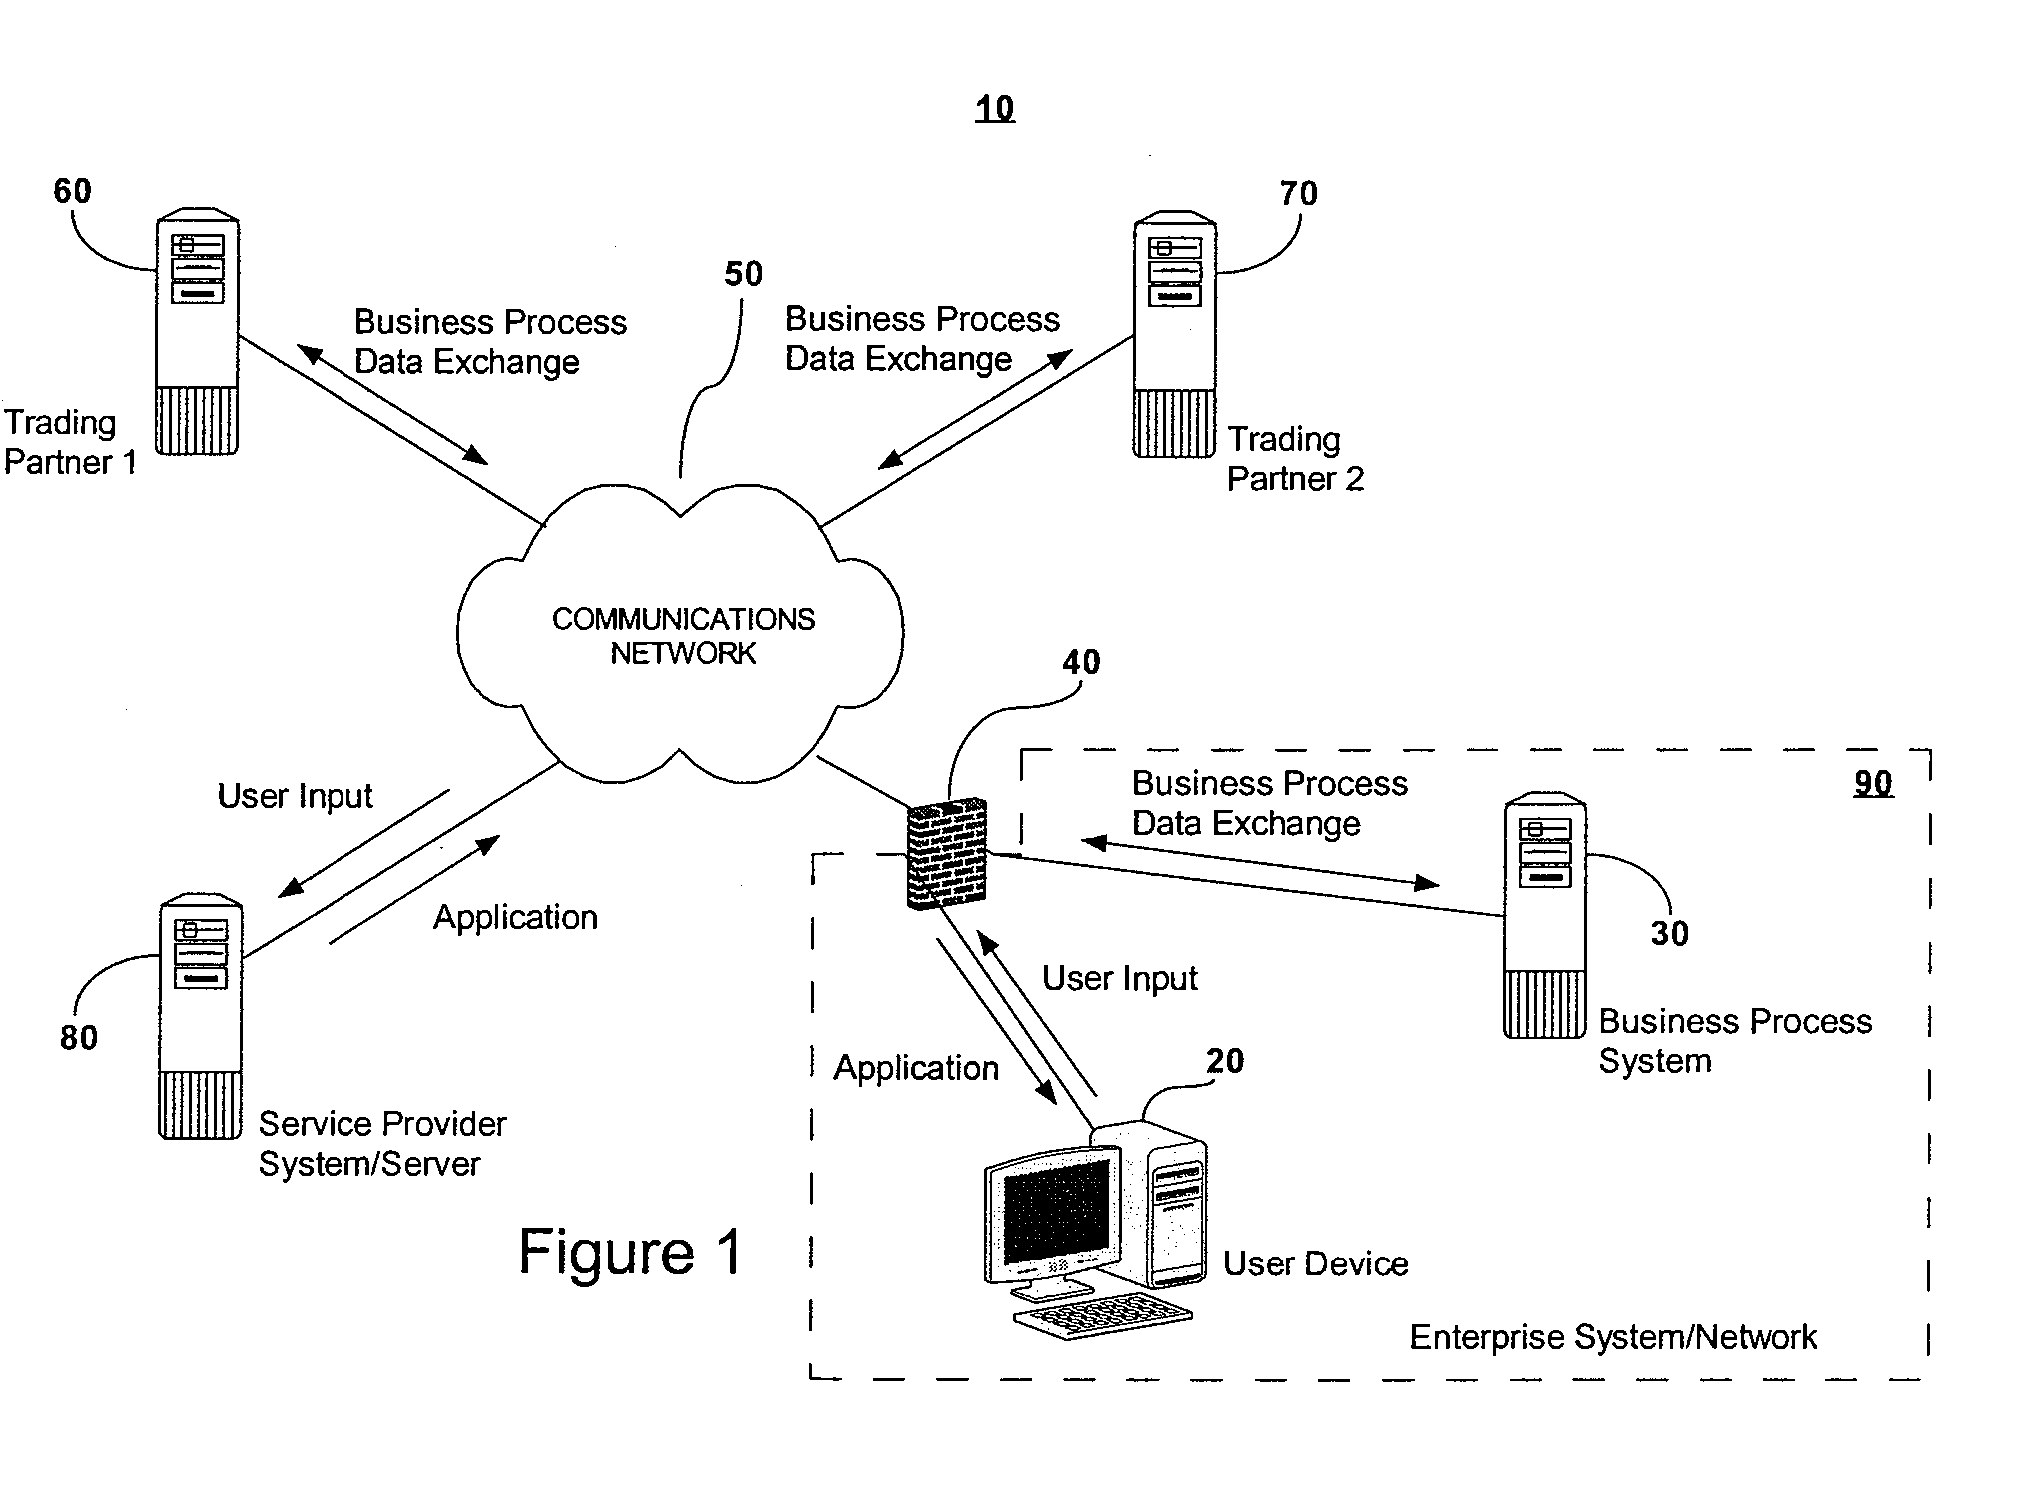 System and method for automated on-demand creation of a customized software application